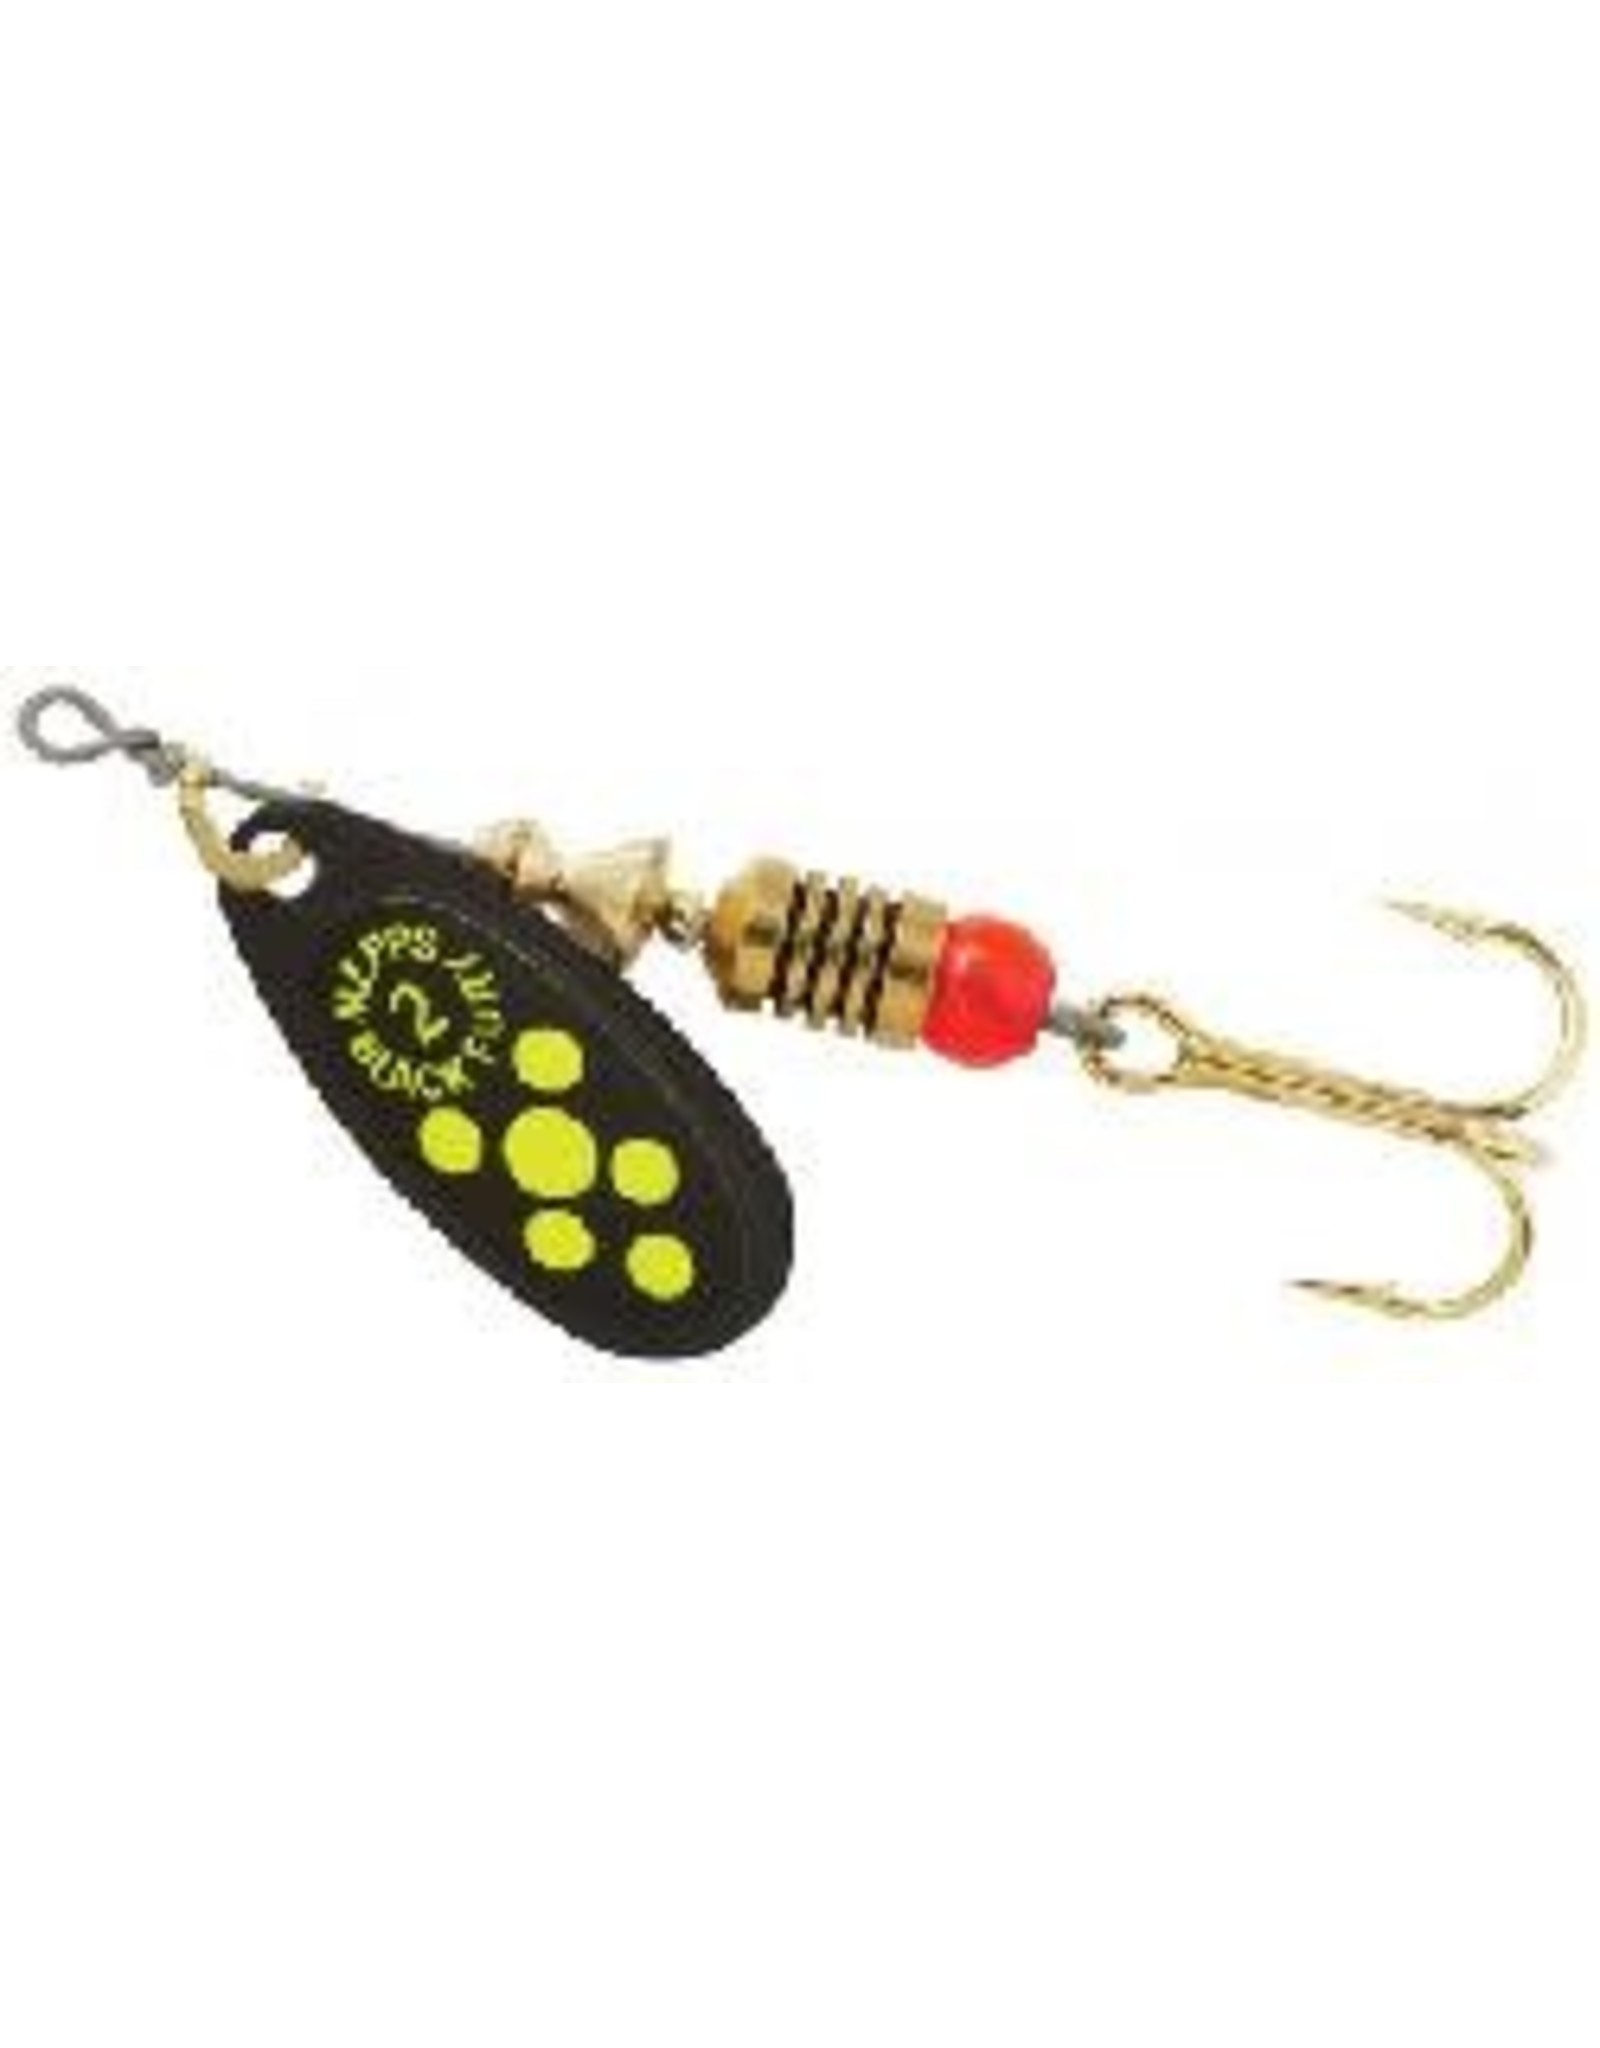 Mepps Mepps Aglia 1/6 Oz. #2 Spinner - Black with Chartreuse Dots